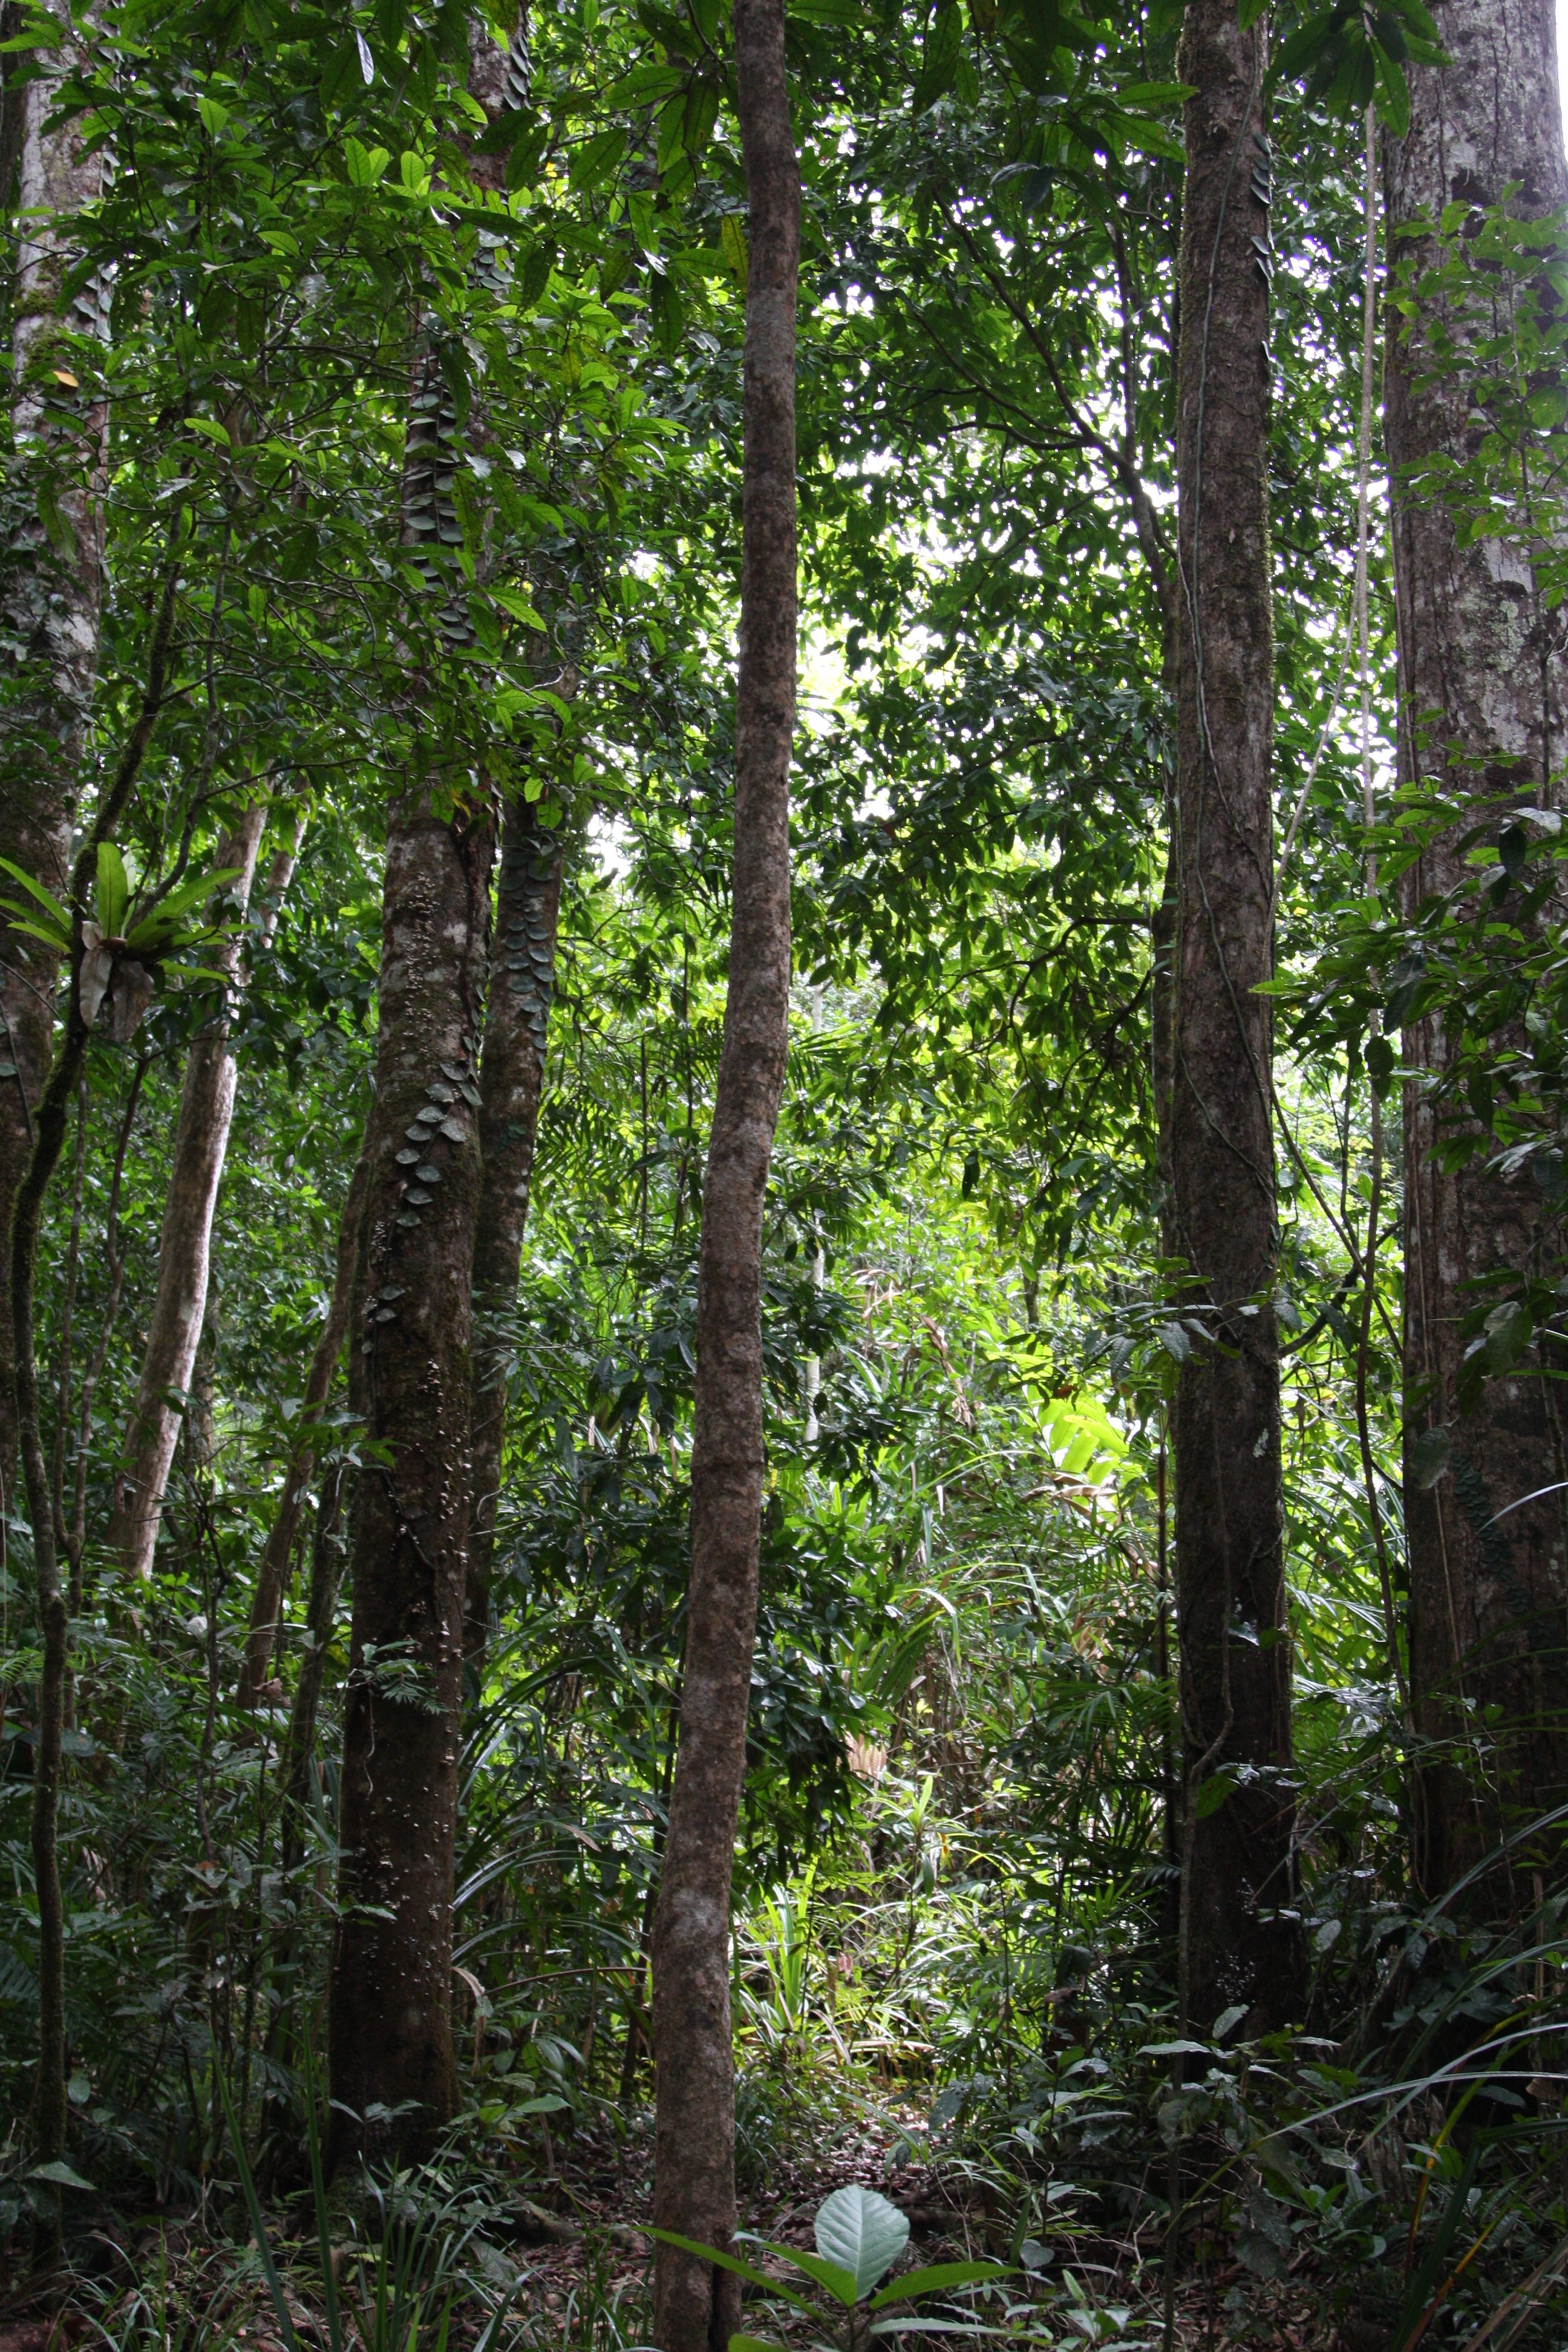 Daintree Rainforest trees in the Mossman Gorge